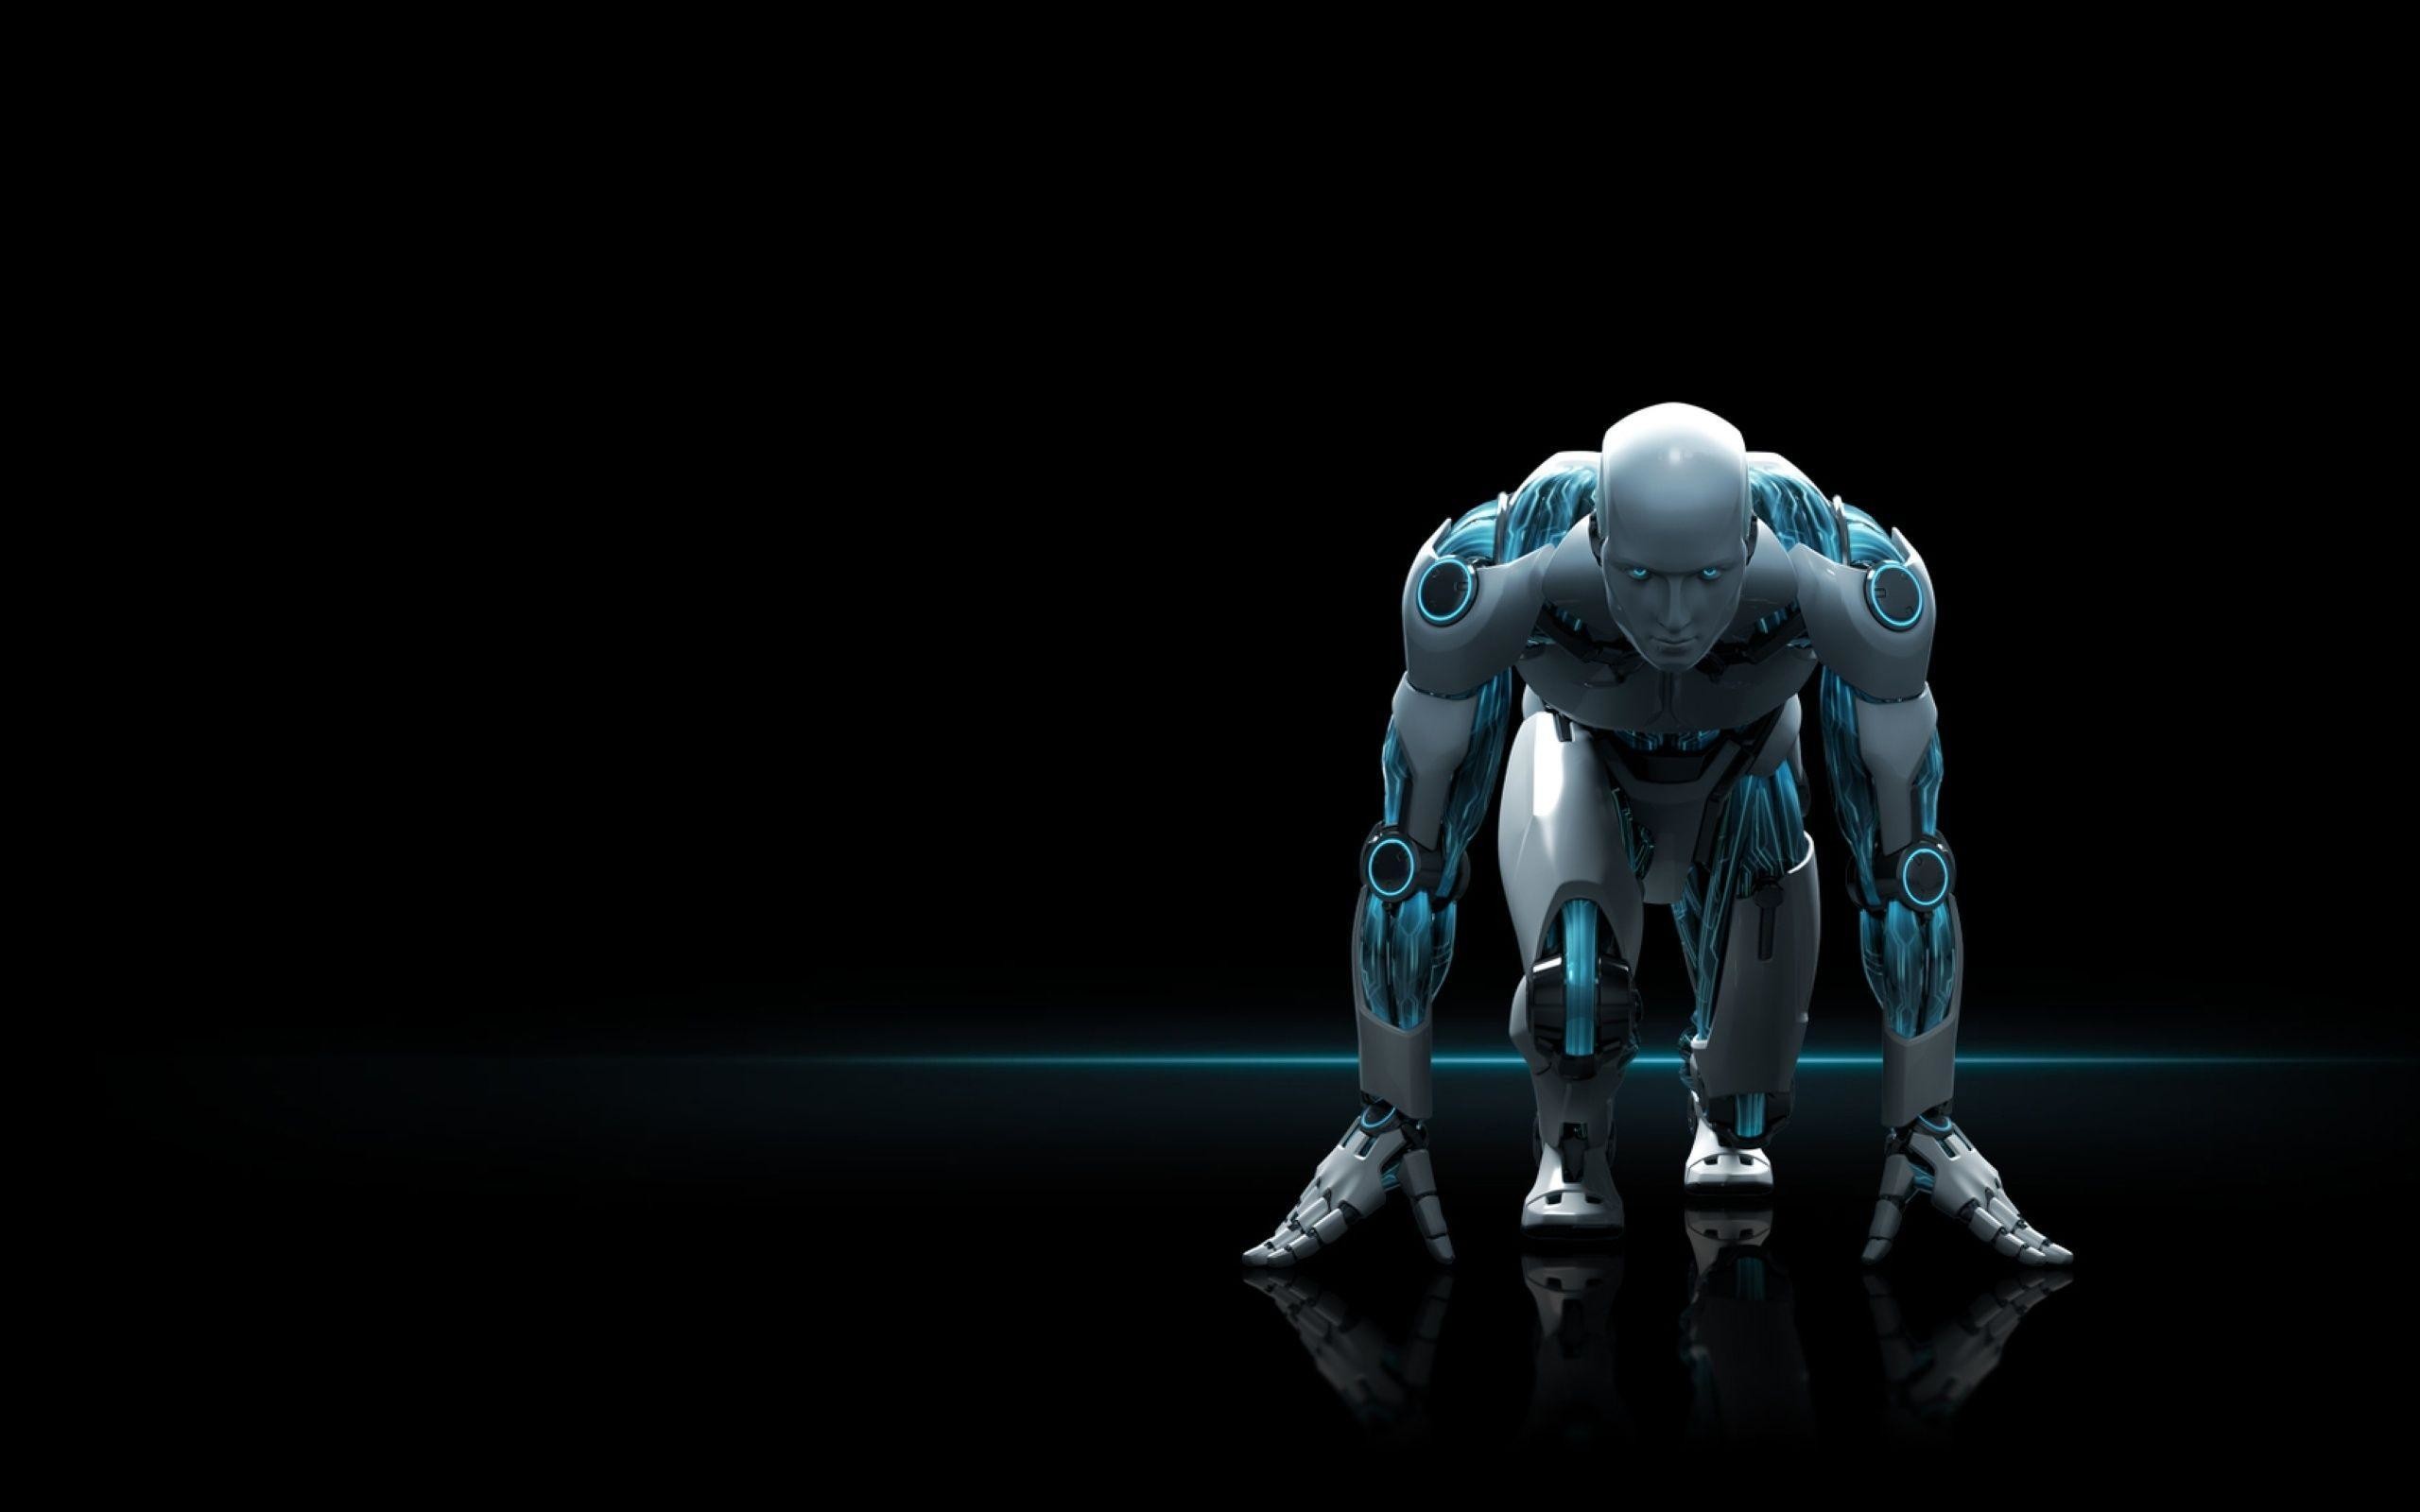 2560x1600 Awesome HD Robot Wallpapers & Backgrounds For Free Download